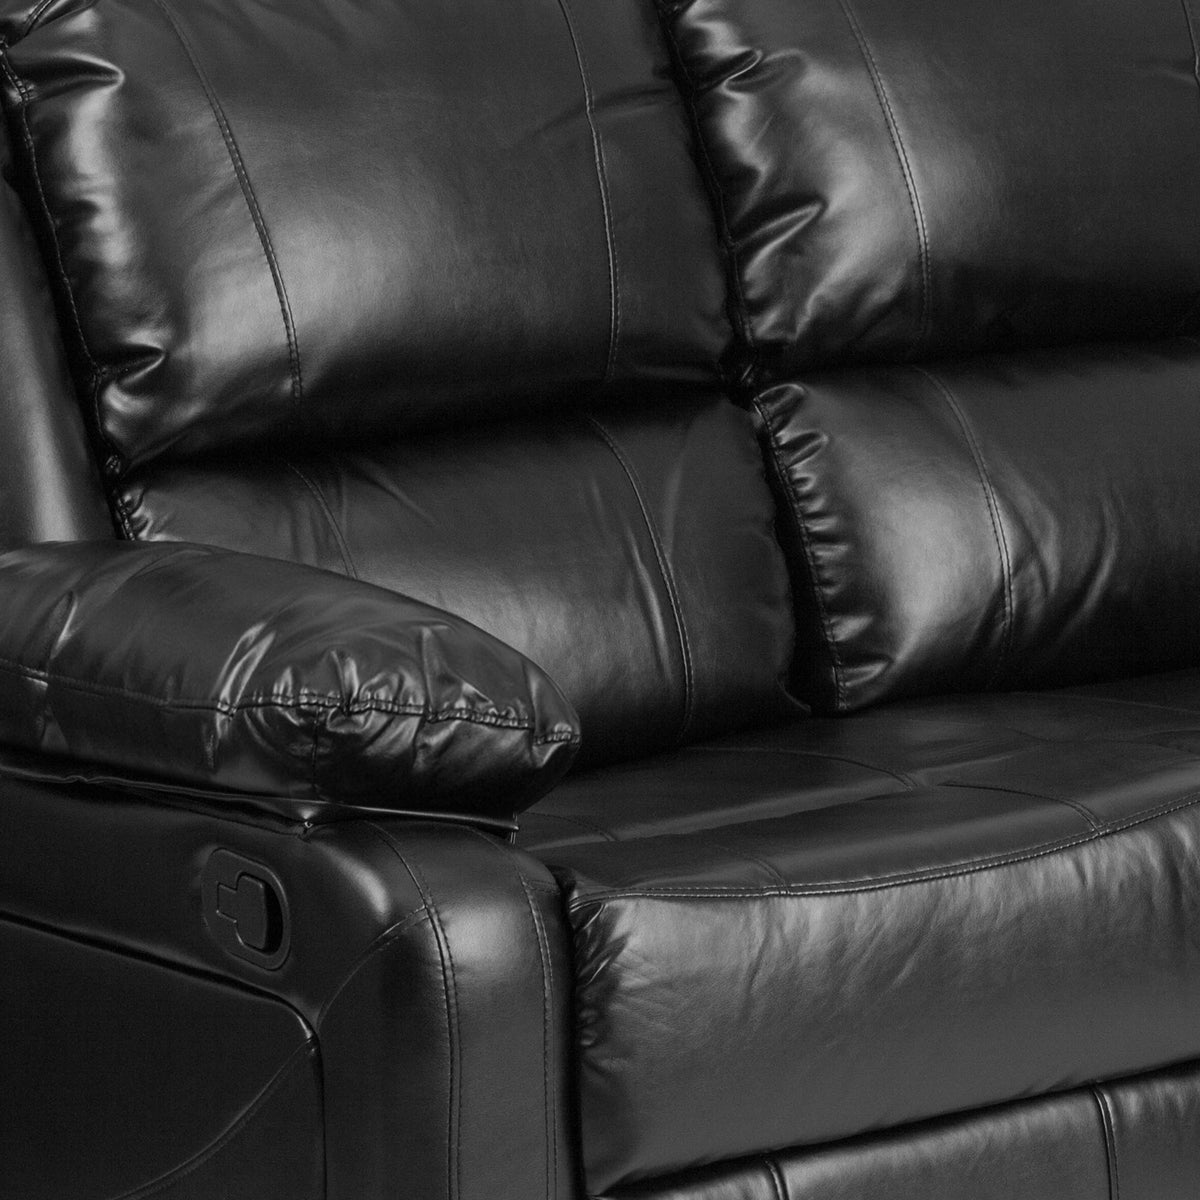 Black LeatherSoft |#| Contemporary Black LeatherSoft Loveseat w/Two Built-In Recliners - Padded Arms